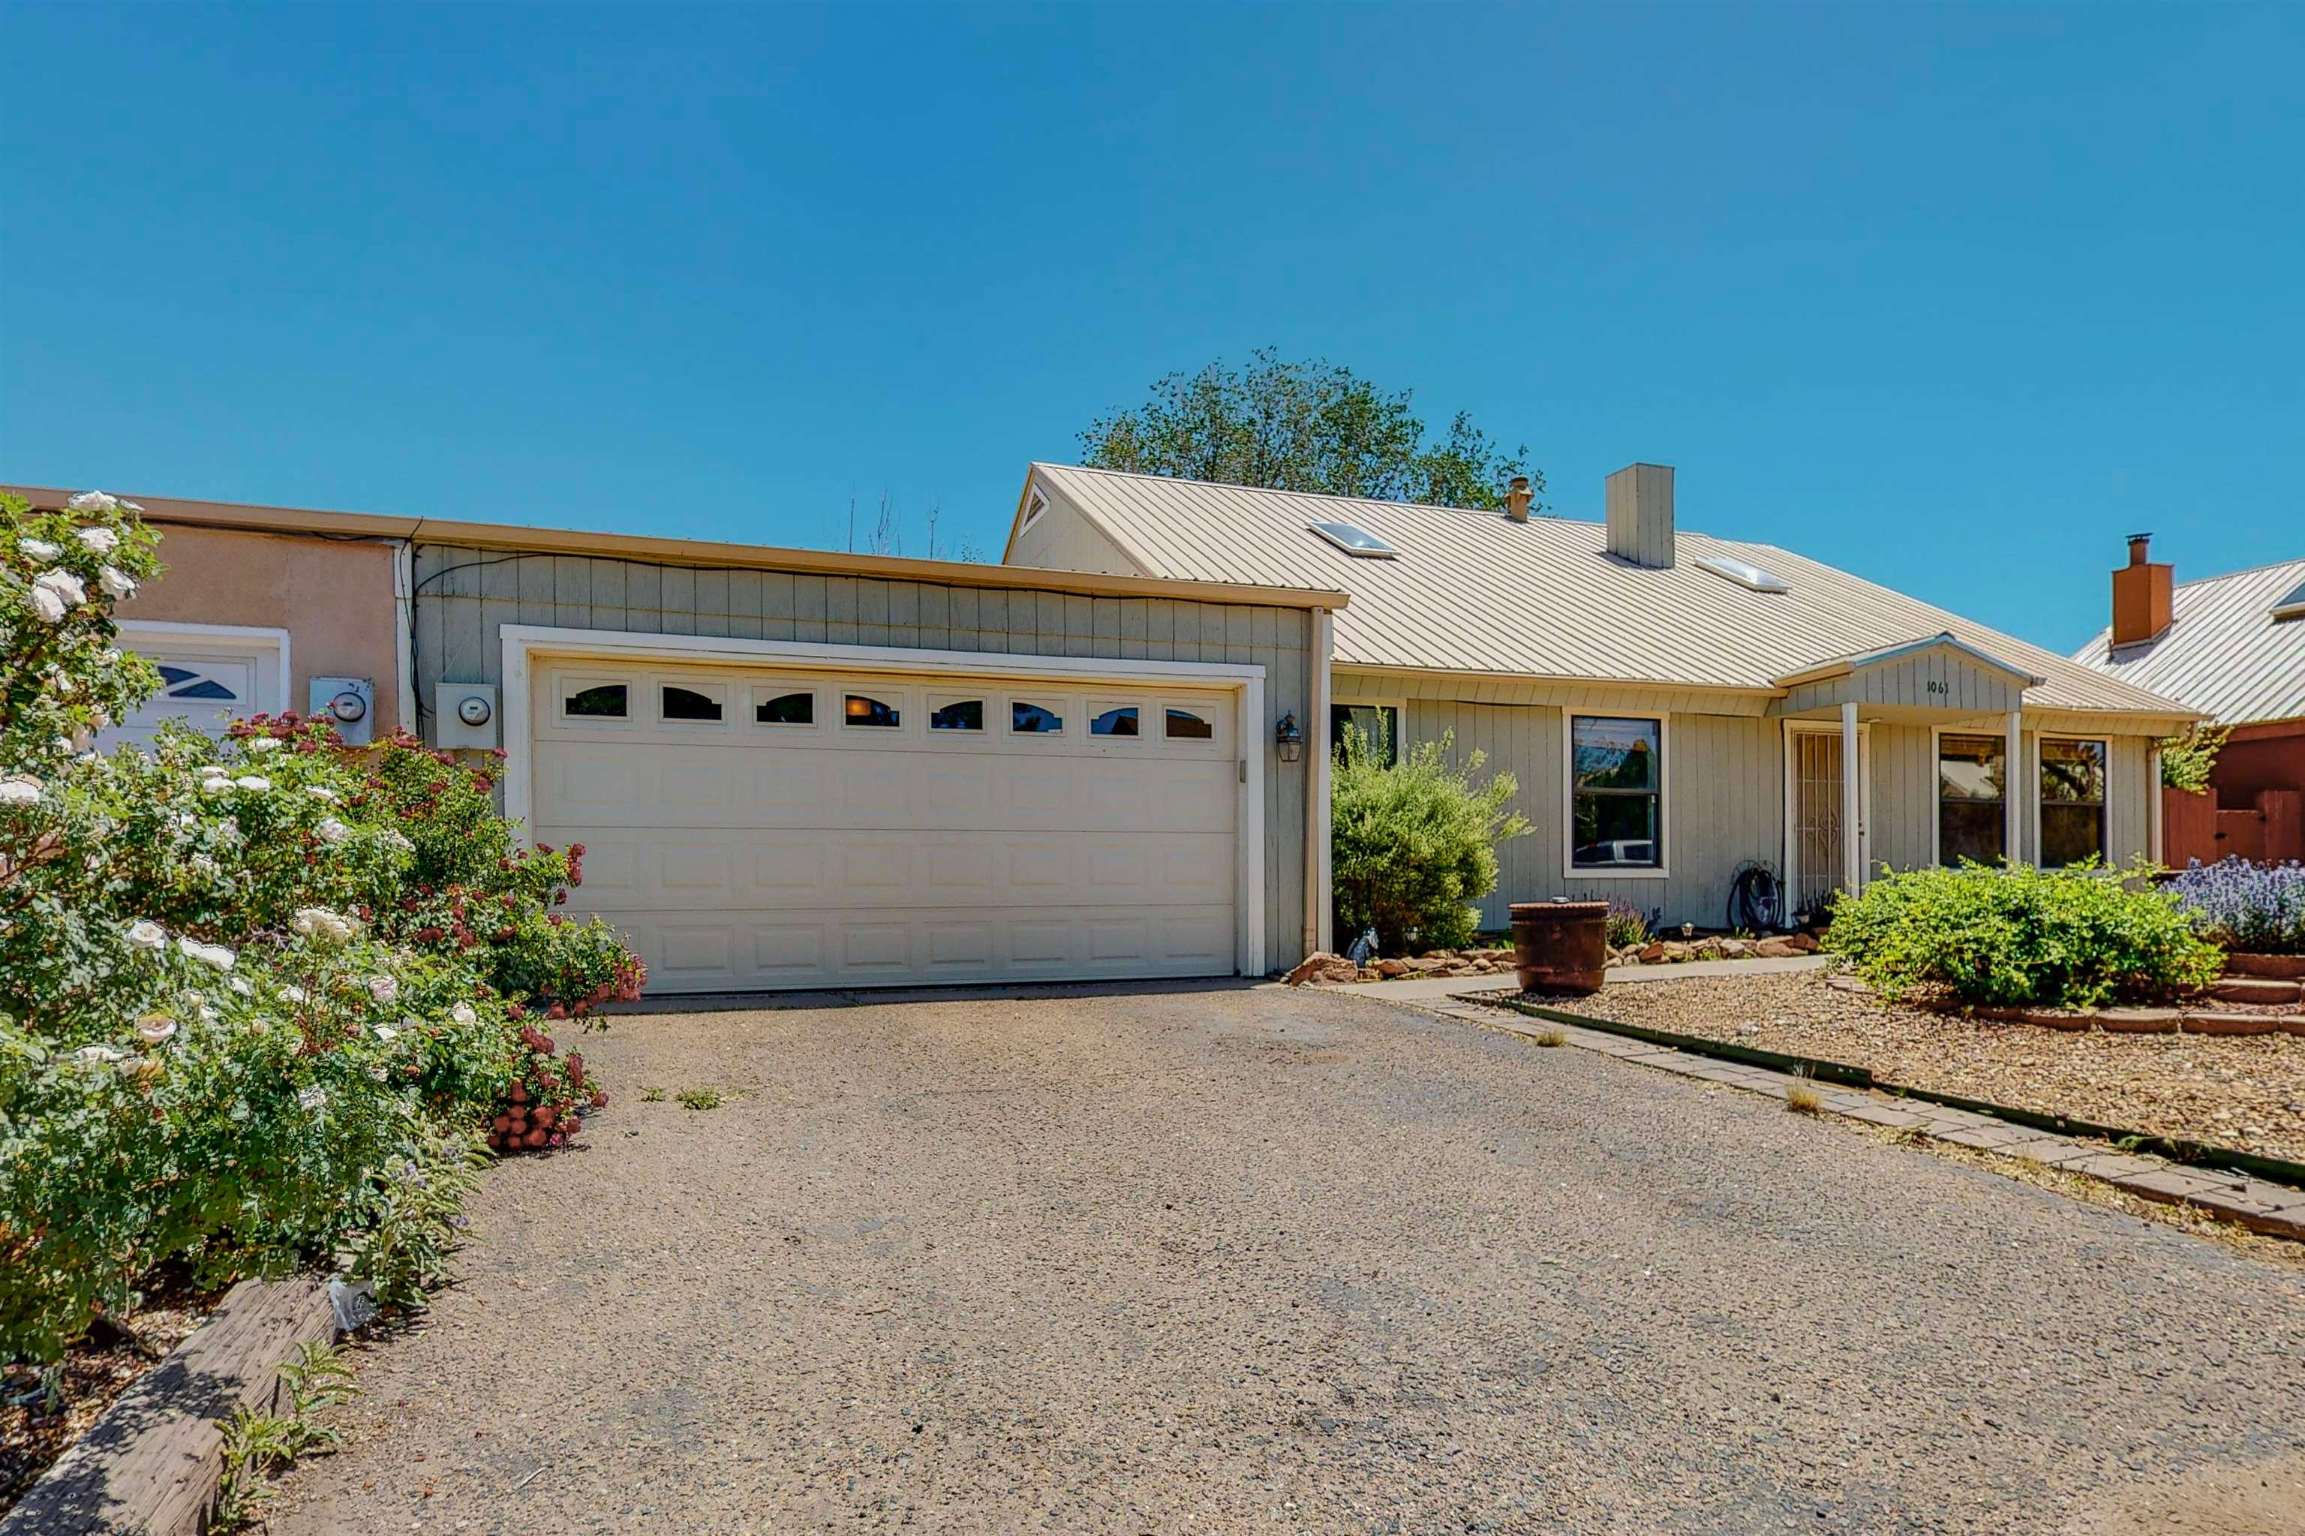 1061 WILLOW, Santa Fe, New Mexico 87507, 3 Bedrooms Bedrooms, ,2 BathroomsBathrooms,Residential,For Sale,1061 WILLOW,202201813